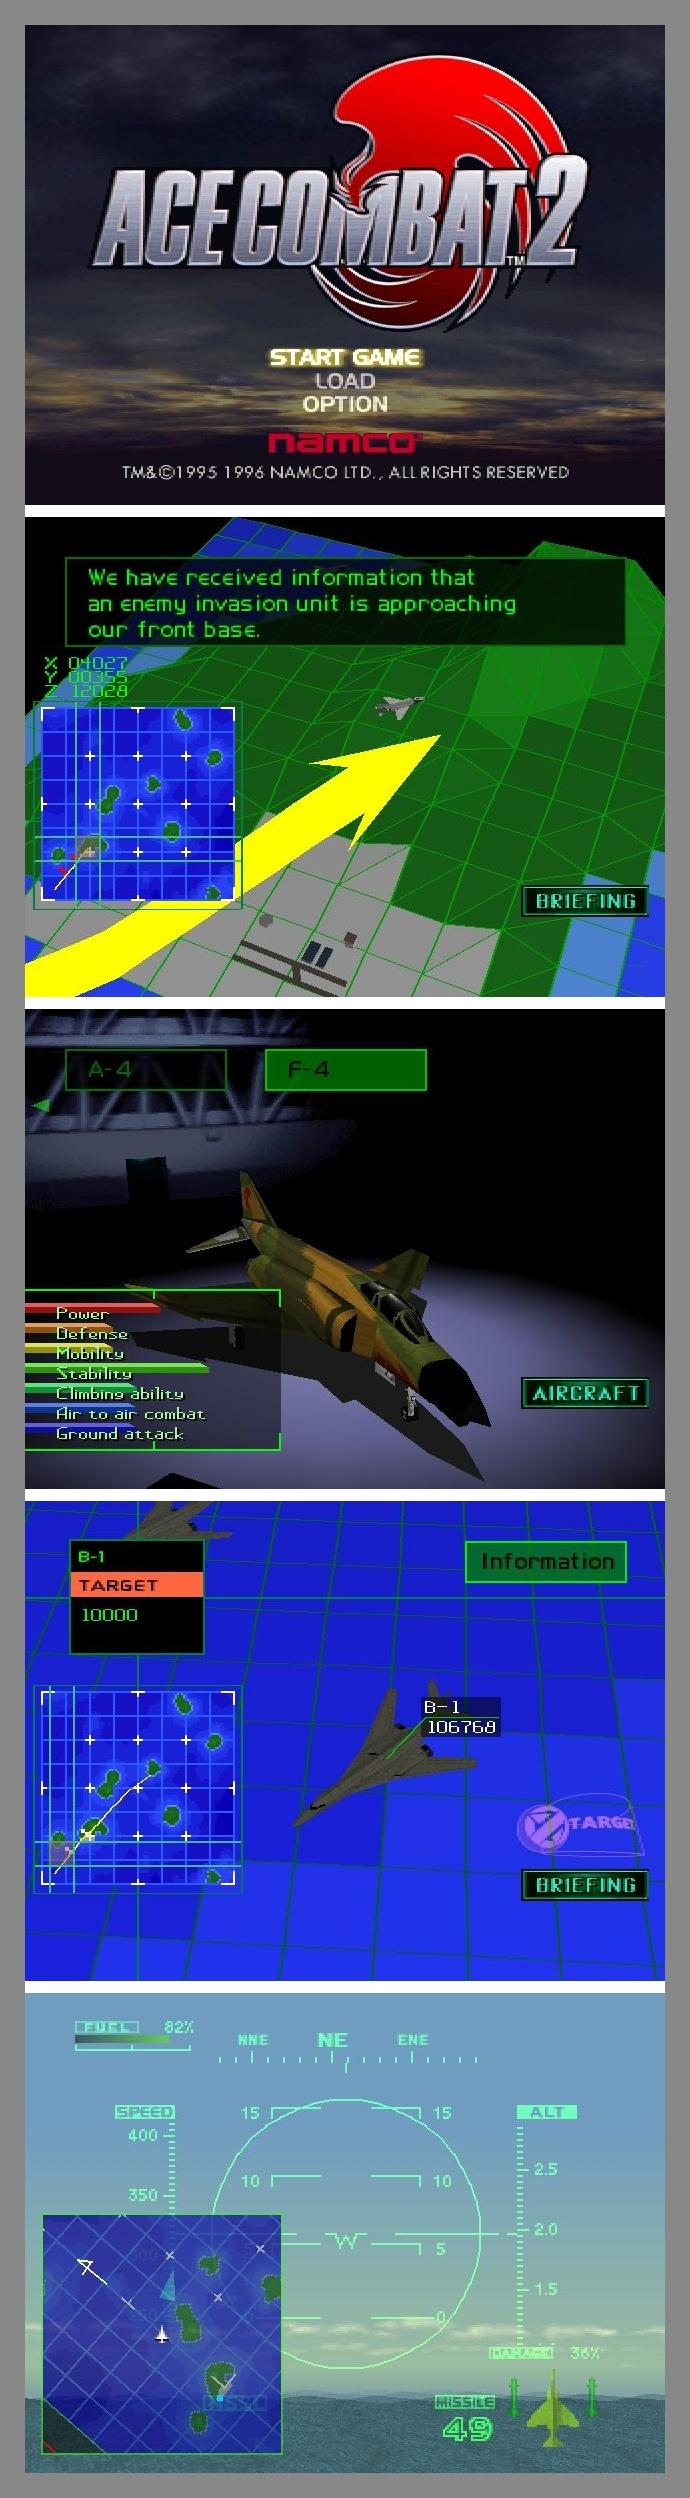 Image For Post | **Remake**
A remake for the Nintendo 3DS, Ace Combat: Assault Horizon Legacy, was released in 2011 in North America and Europe, and in 2012 in Japan, where it was renamed Ace Combat 3D: Cross Rumble. Assault Horizon Legacy features a complete revamp of the game's storyline, alongside the addition of cutscenes, voice acting and remade level designs. It also adds several new fighters not found in the original, including the Boeing F-15SE Silent Eagle and the Sukhoi PAK FA..Despite its namesake, it has very little in common with its predecessor Ace Combat: Assault Horizon. It was followed by a 2015 update called Ace Combat: Assault Horizon Legacy +, adding amiibo support and updated control handling for the New Nintendo 3DS.


**Alternate Titles**
"皇牌空战2" -- Chinese spelling (simplified)"エースコンバット2" -- Japanese Spelling